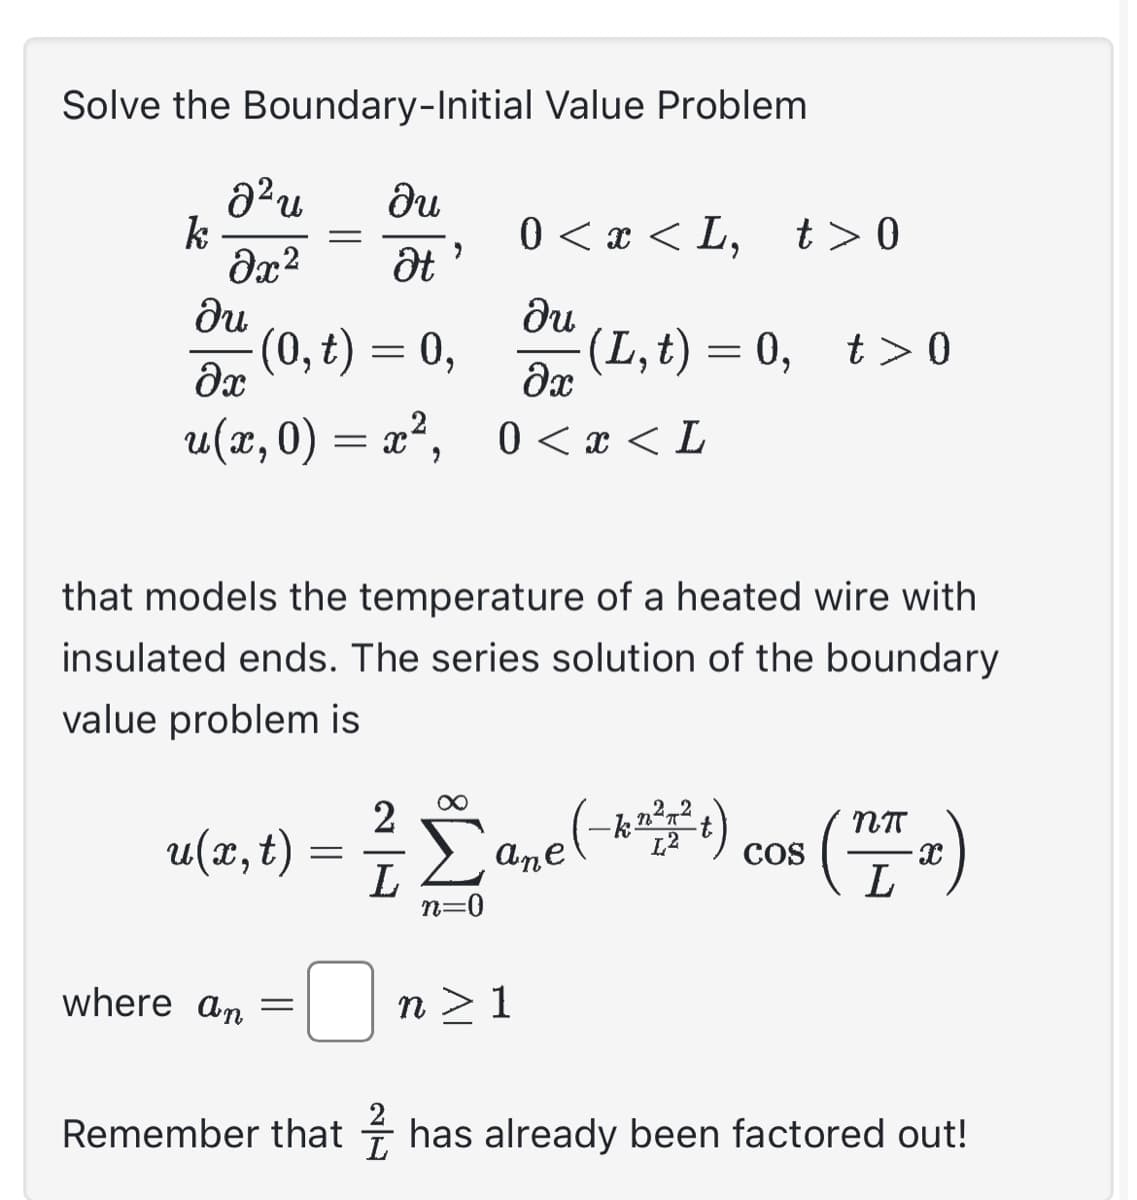 Solve the Boundary-Initial Value Problem
du
Ət
k
² u
Əx²
=
Ju
əx
u(x,0) = x²,
(0, t) = 0,
2
where an =
that models the temperature of a heated wire with
insulated ends. The series solution of the boundary
value problem is
2
0 < x < L, t> 0
ди
əx
0<x<L
u(x, t) Σane (-***) cos
=
n=0
(L,t)=0, t>0
n> 1
NTT
X
Remember that has already been factored out!
L